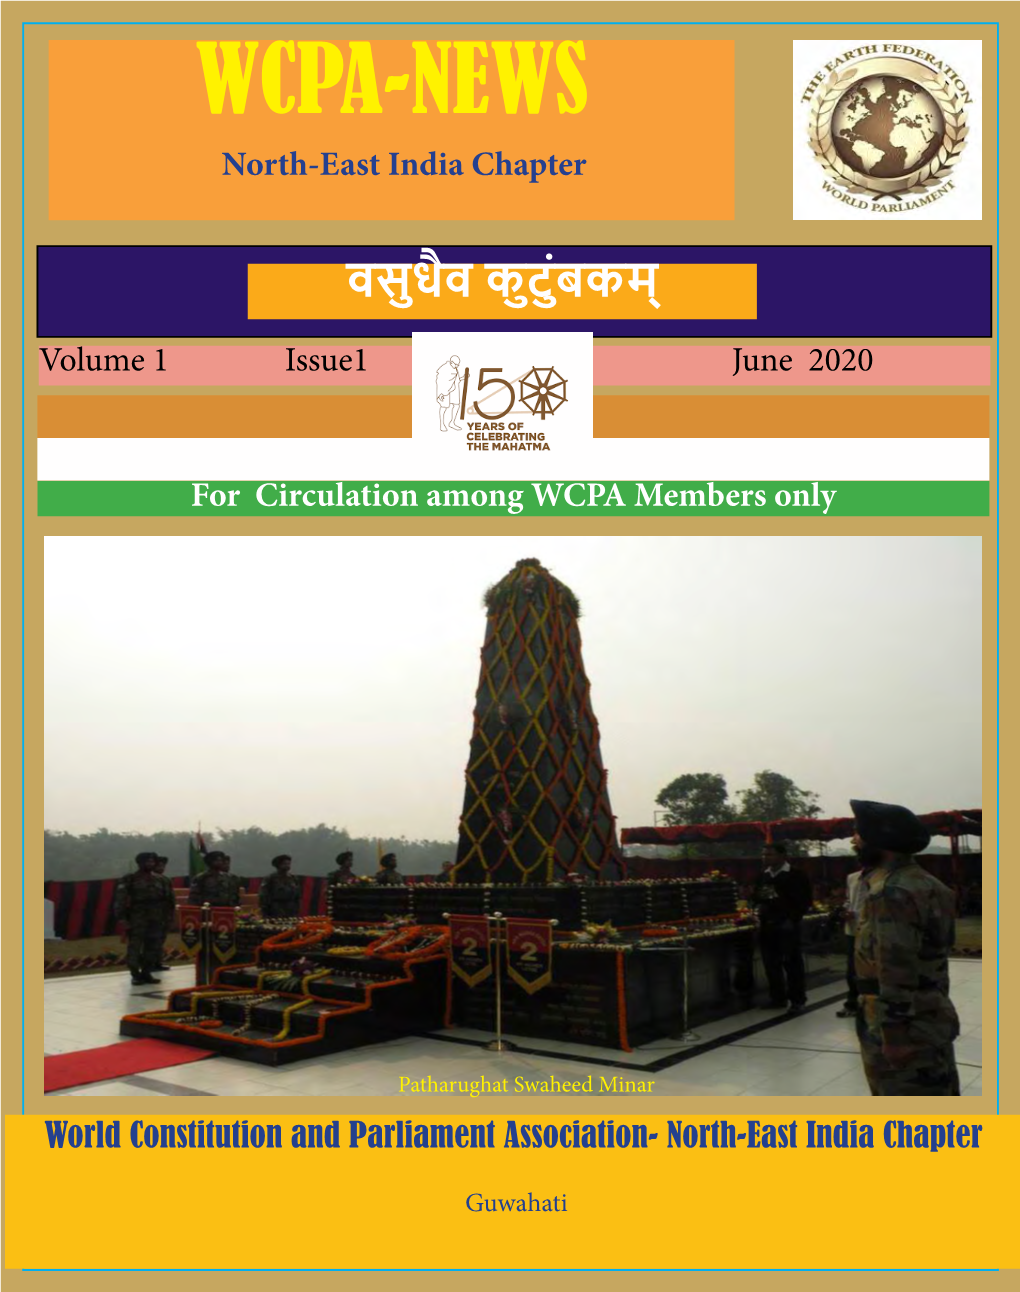 WCPA-NEWS North-East India Chapter